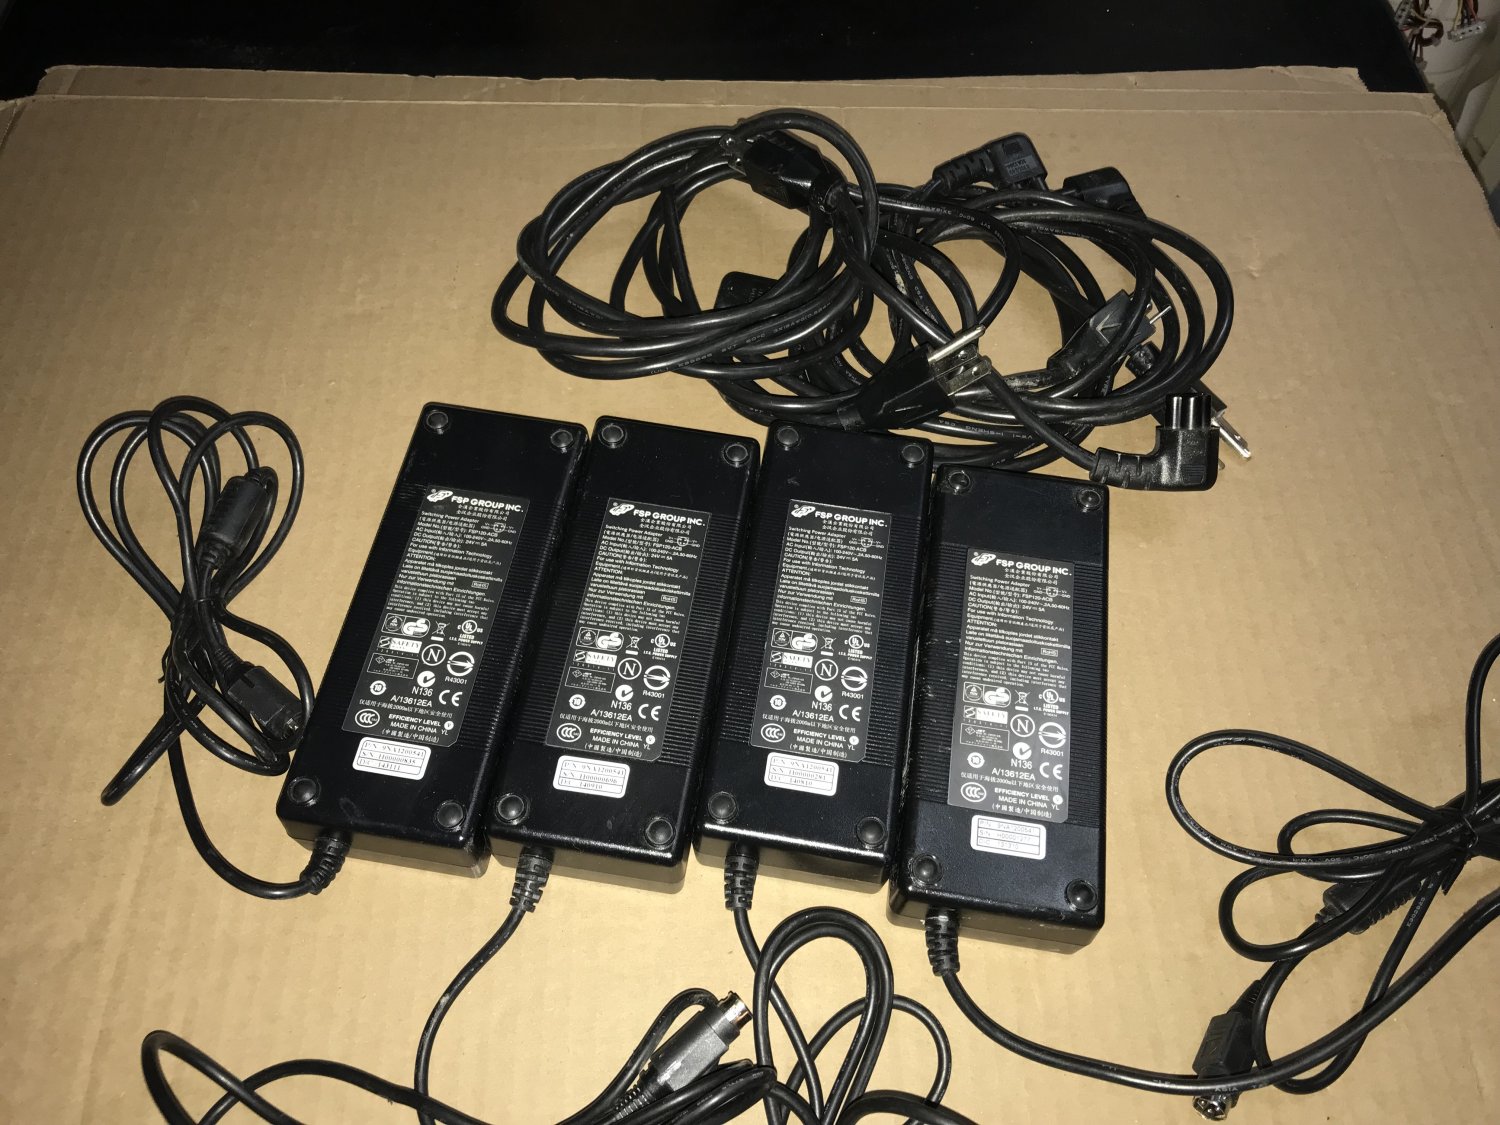 Lot of 4 FSP Group 24V 5A 4-pin Power Adapters FSP120-ACB FSP120ACB 9NA1200541